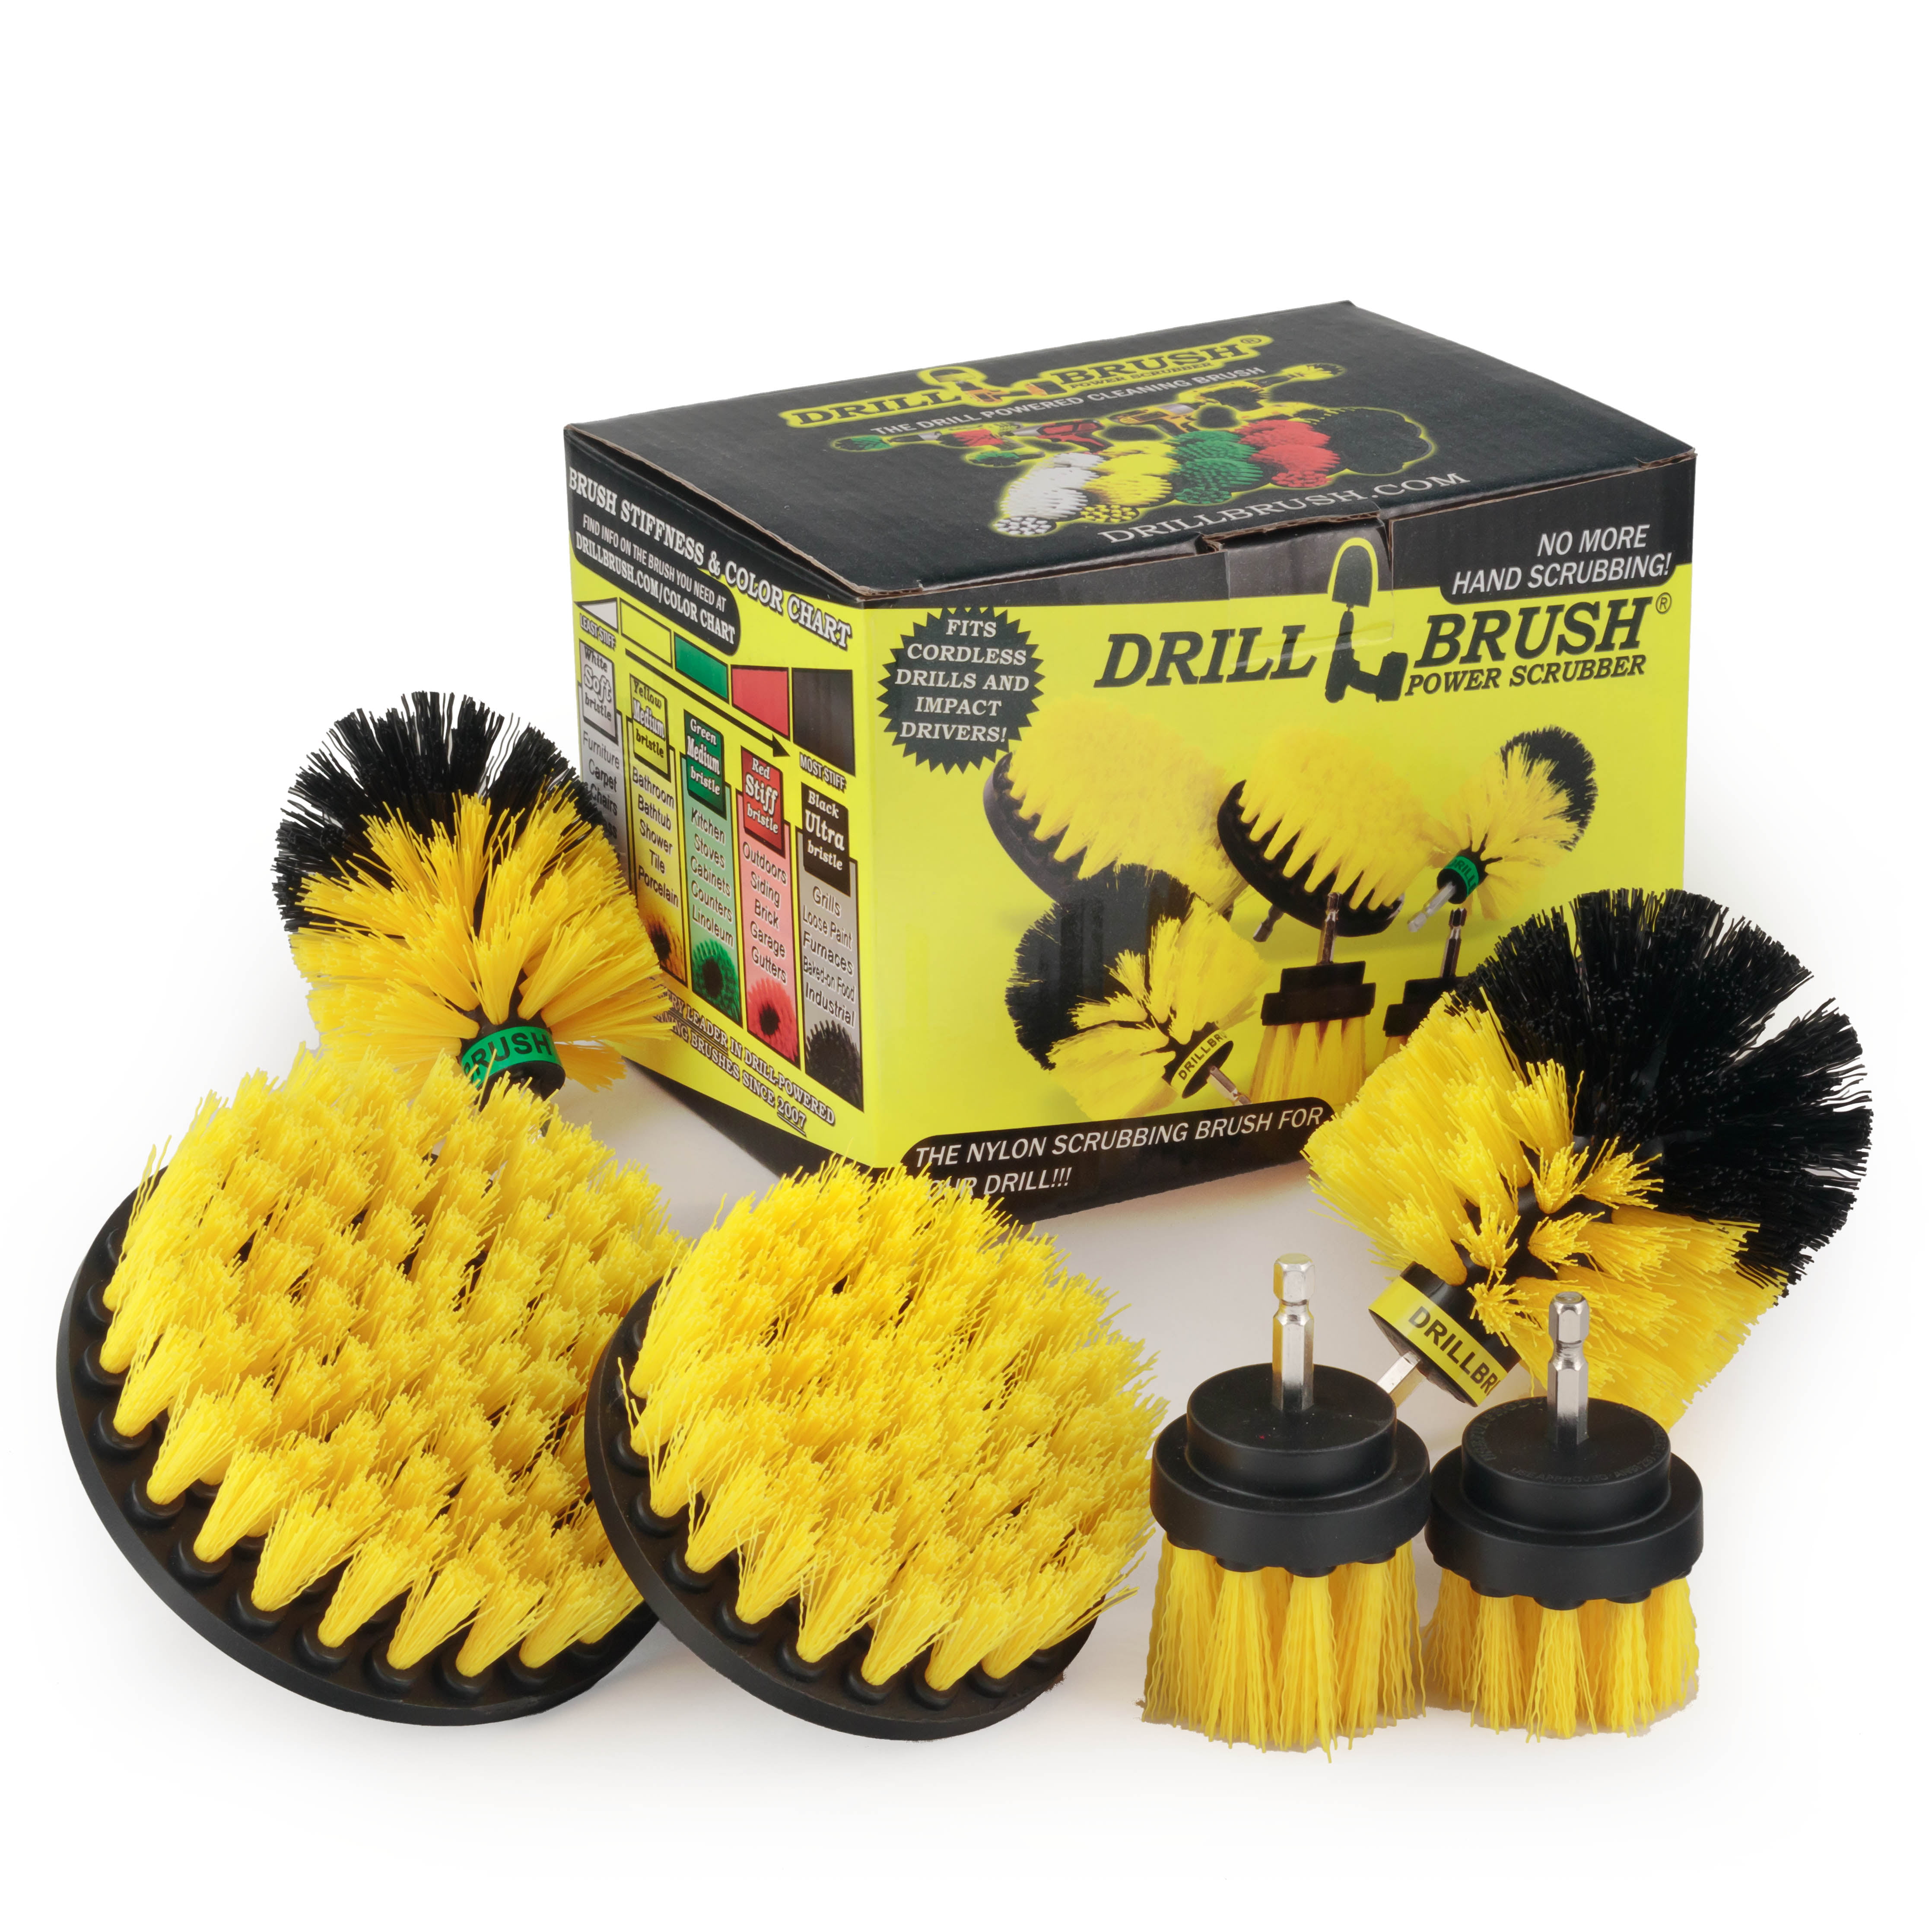 Original, 4in, 5in, 2in Short, and Corner Yellow Brushes - Medium Stiffness  - Bathroom & Shower Cleaning | Y-S-542CO-QC-DB